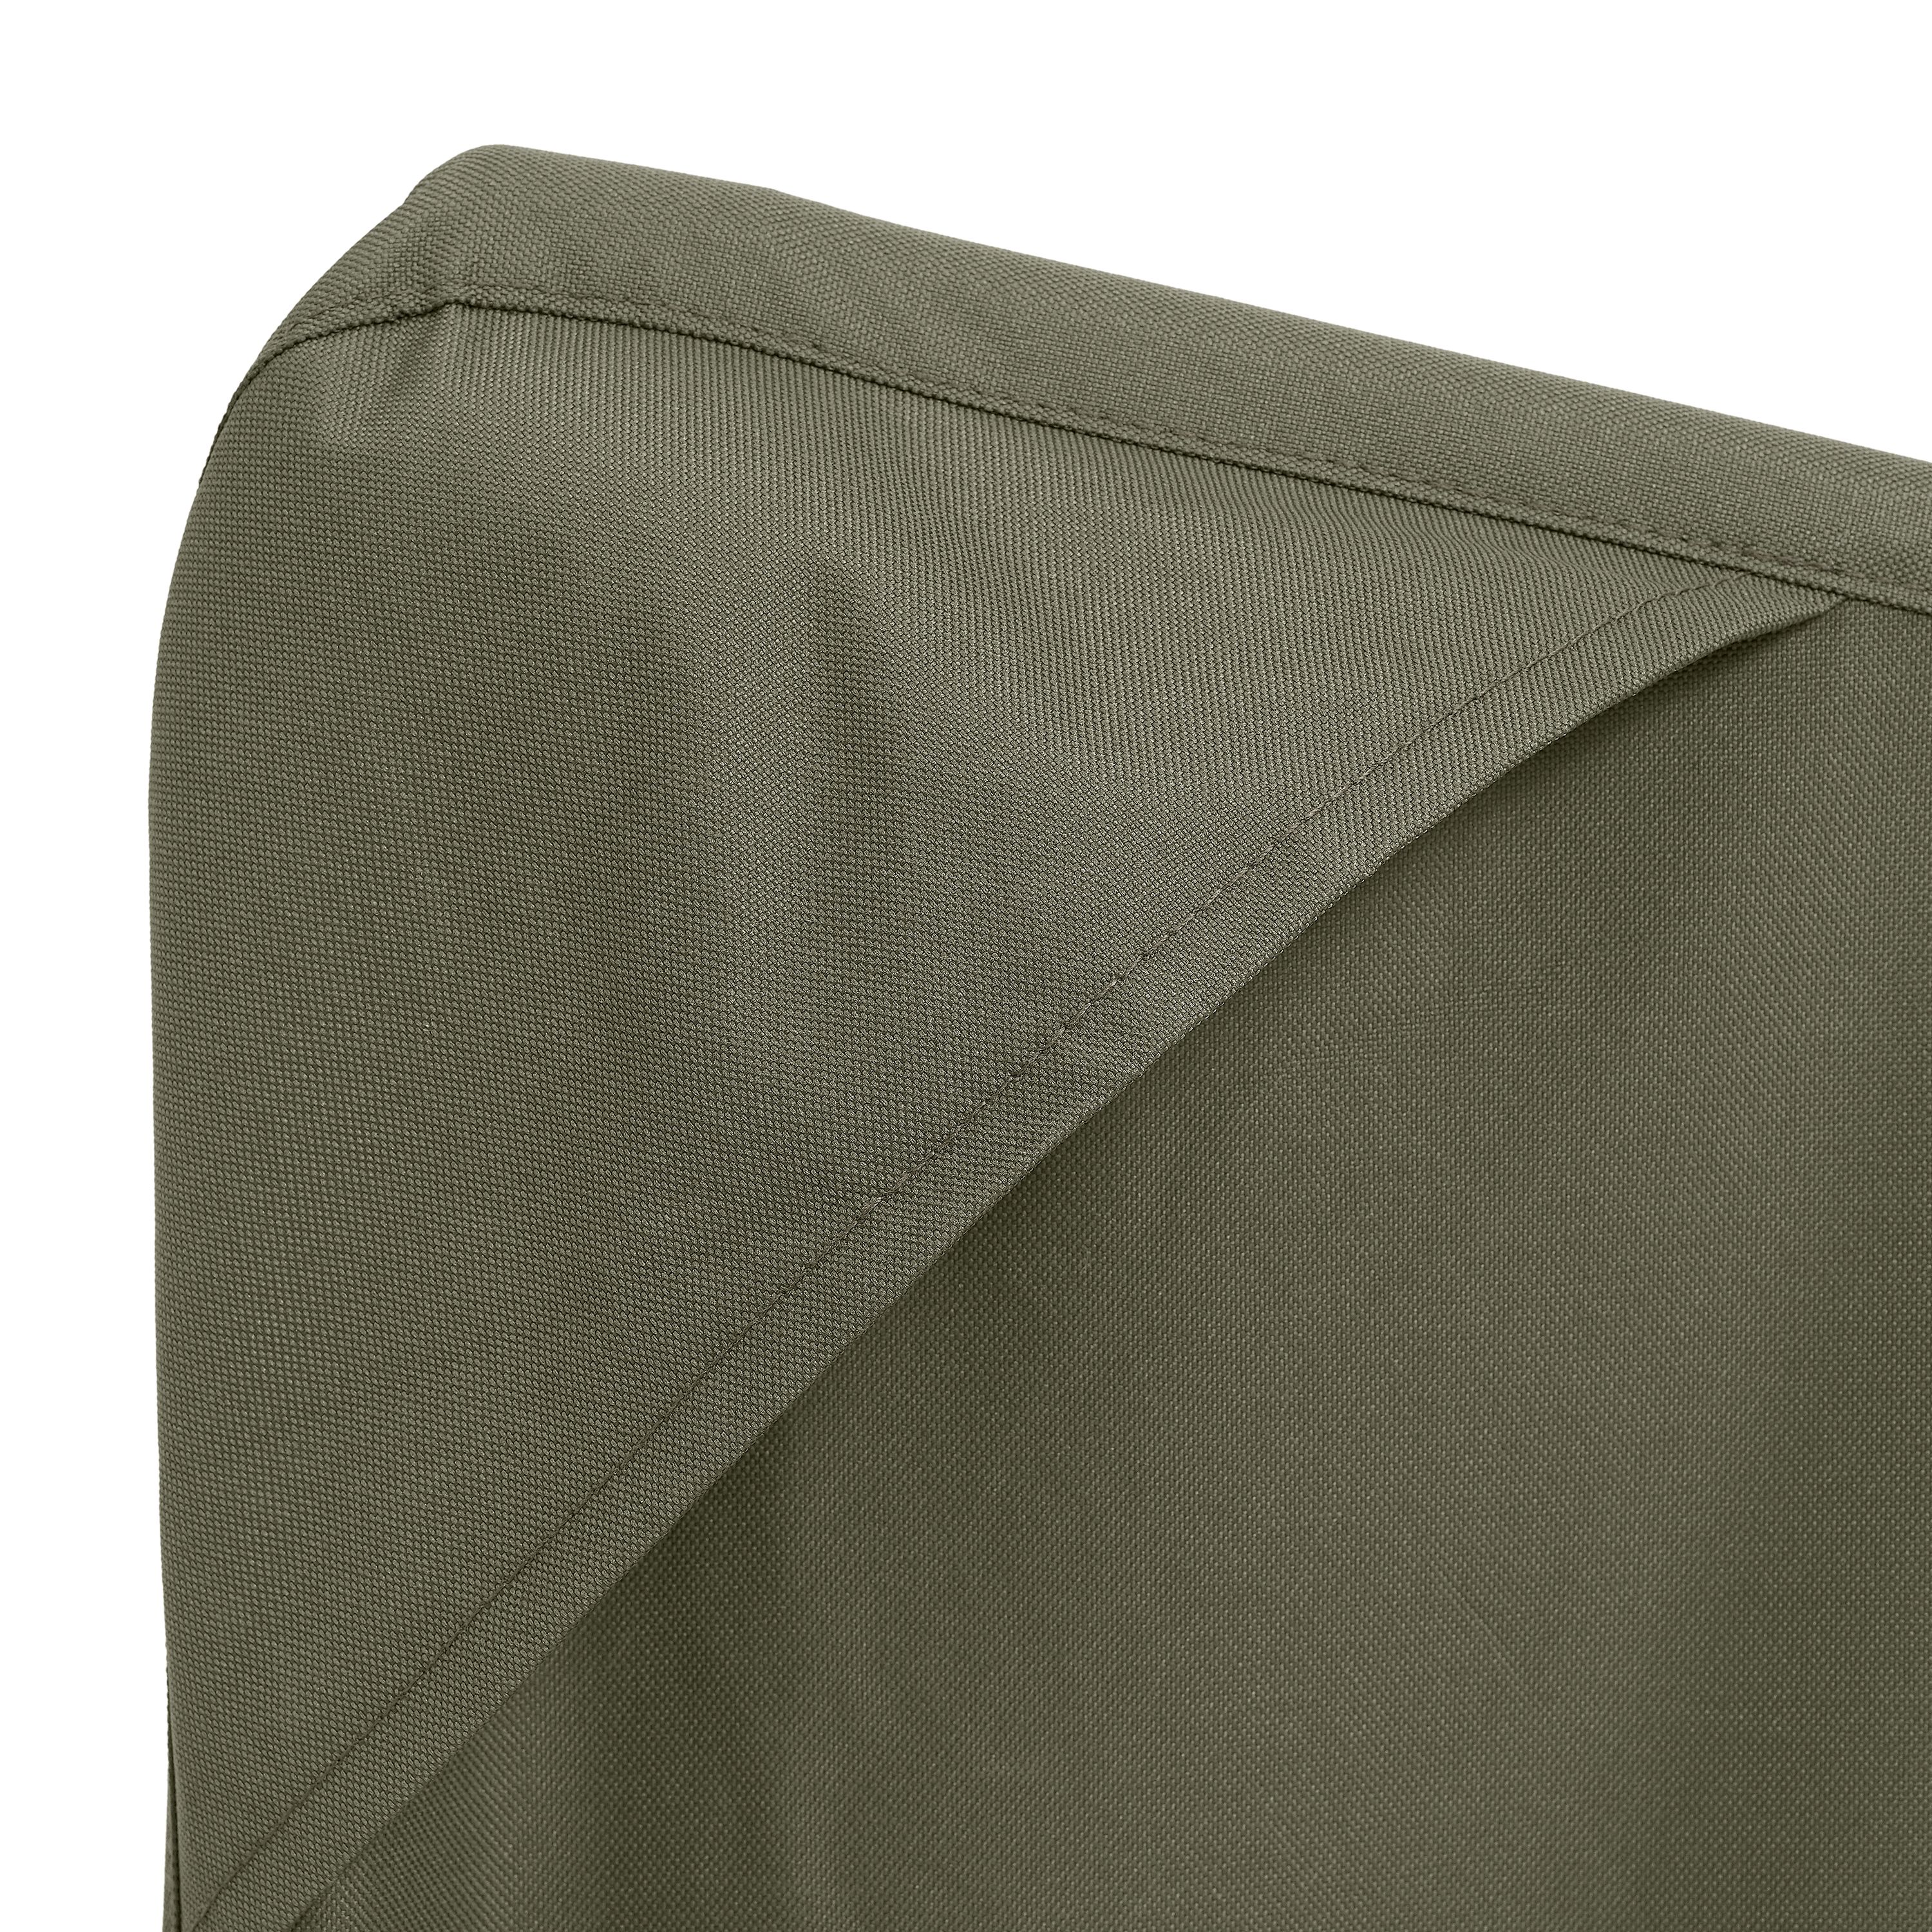 Better Homes & Gardens 33.5" x 31.5" x 36" Olive Gray Rectangle Patio Chair Cover - image 5 of 5